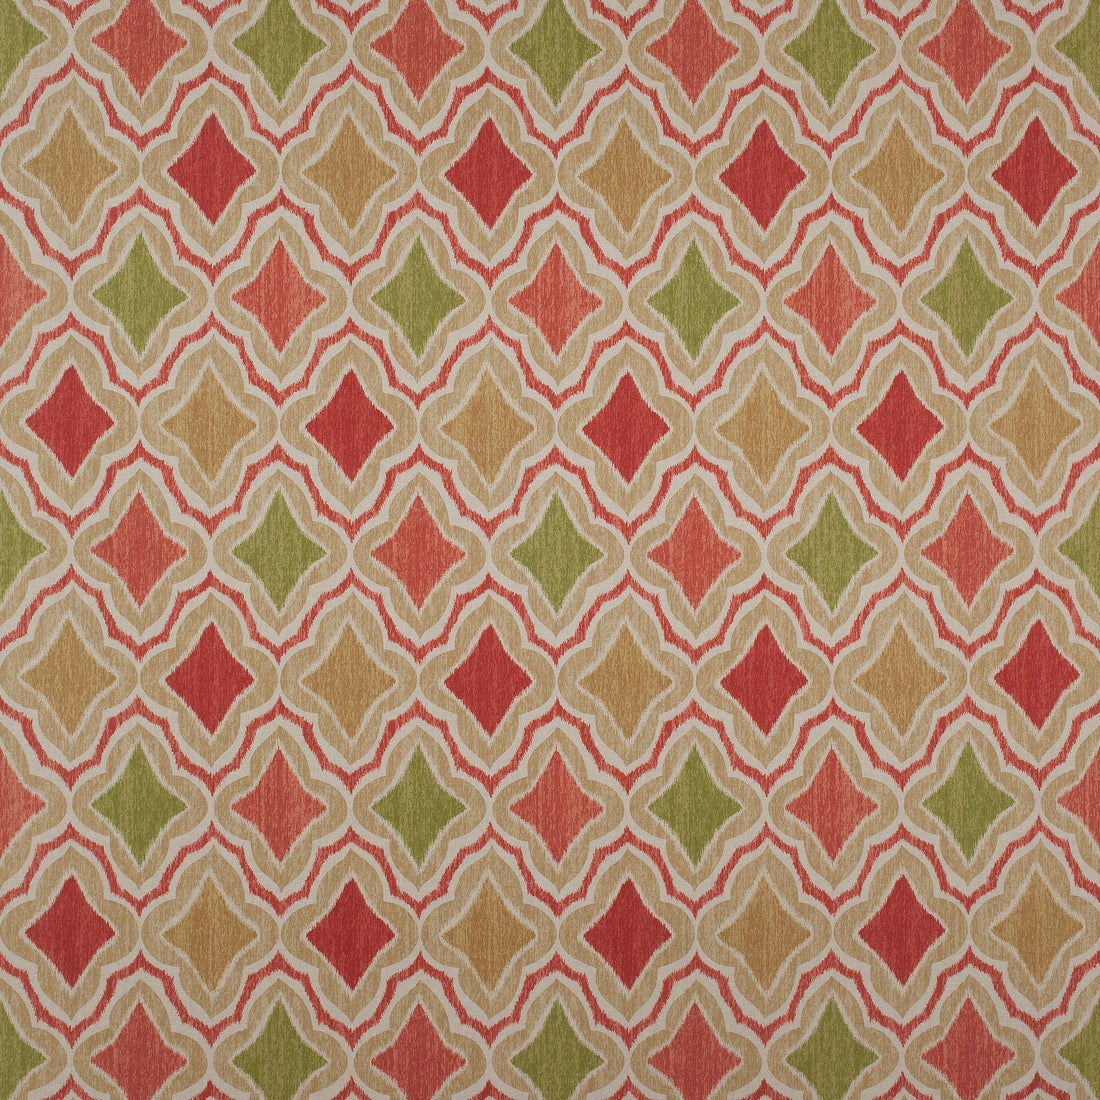 Cruising fabric in sun baked color - pattern number F988746 - by Thibaut in the Trade Routes collection